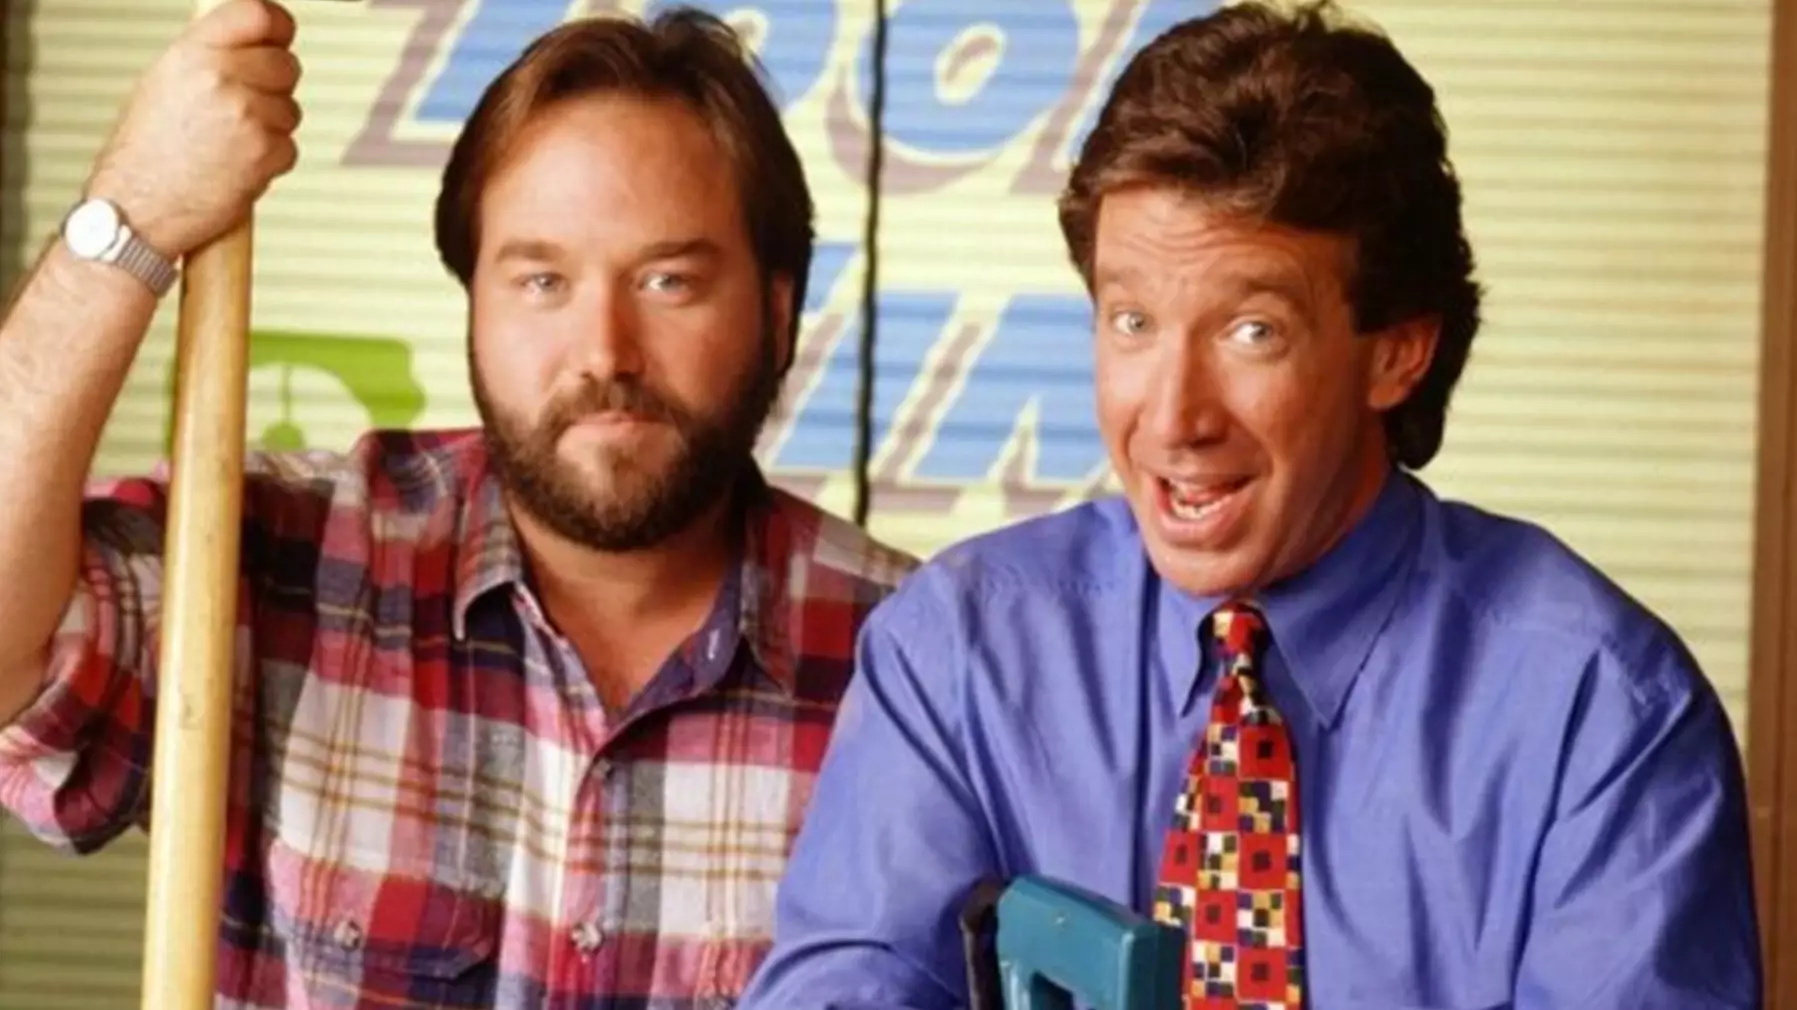 Home Improvement Stars Tim Allen And Richard Karn Are Reuniting For A New TV Show